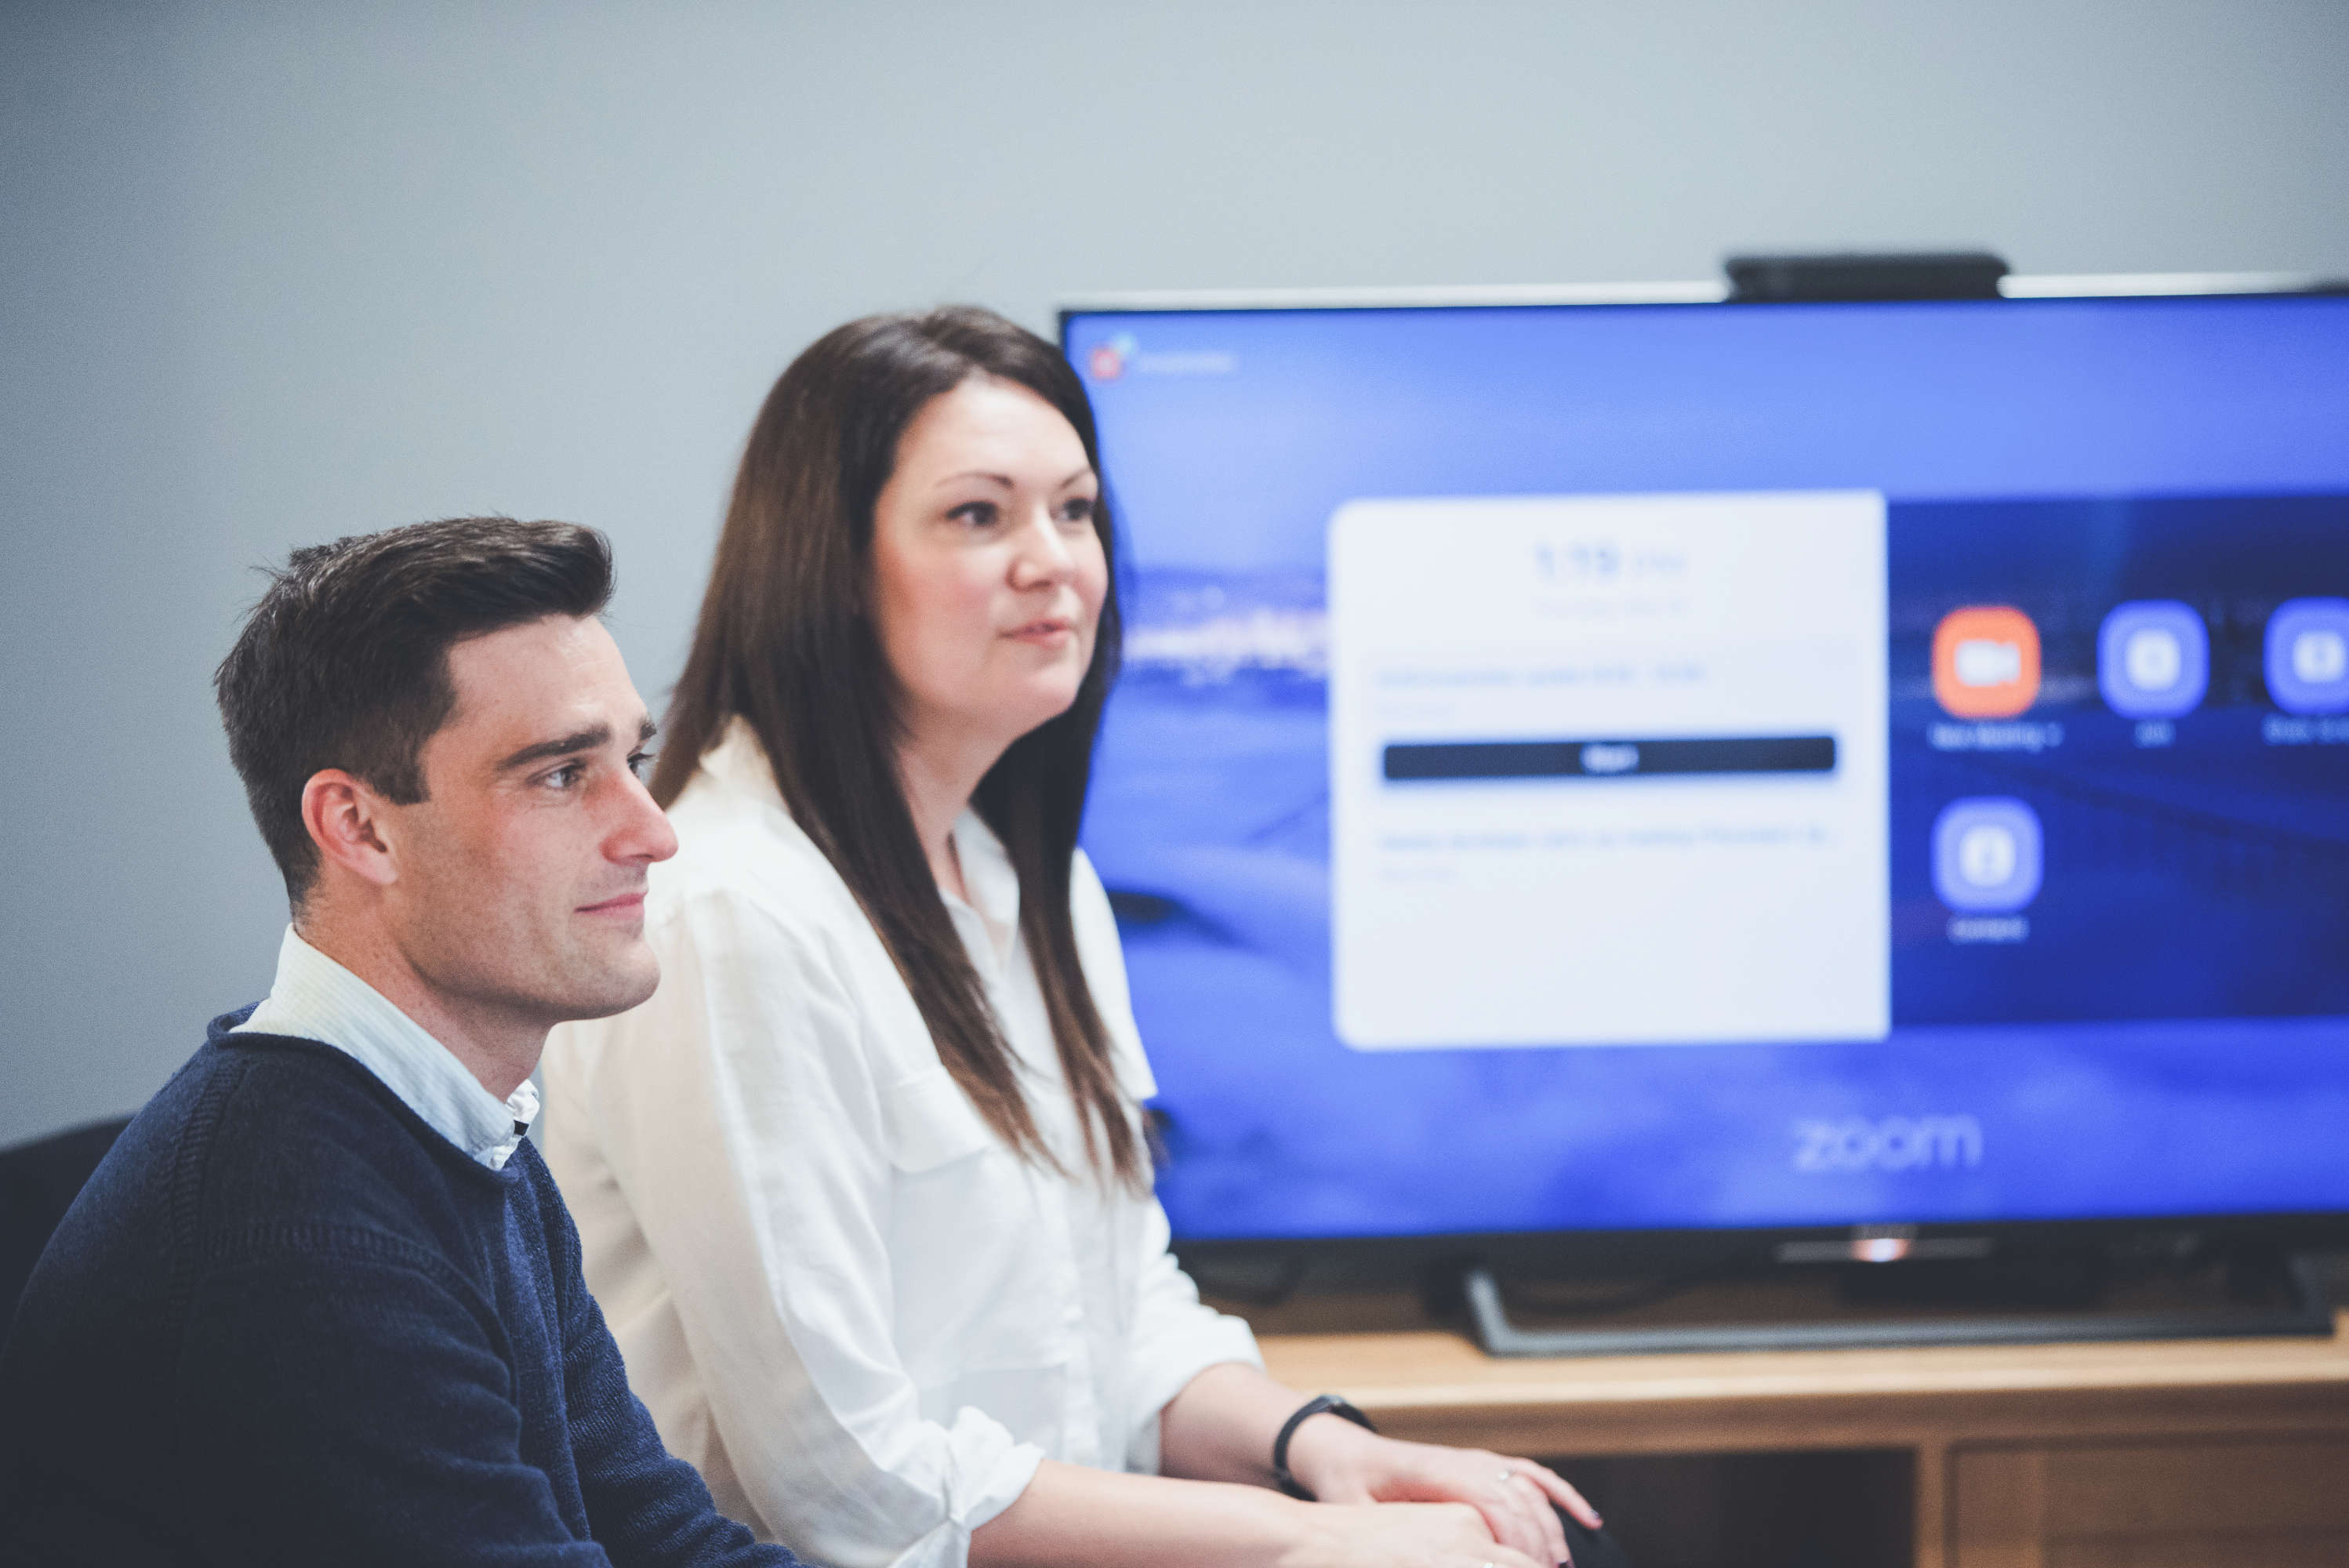 A project manager and client manager discuss with a colleague before a video conference call. A large screen behind them is set up for the video call, both are focusing on their colleague who is out of frame.